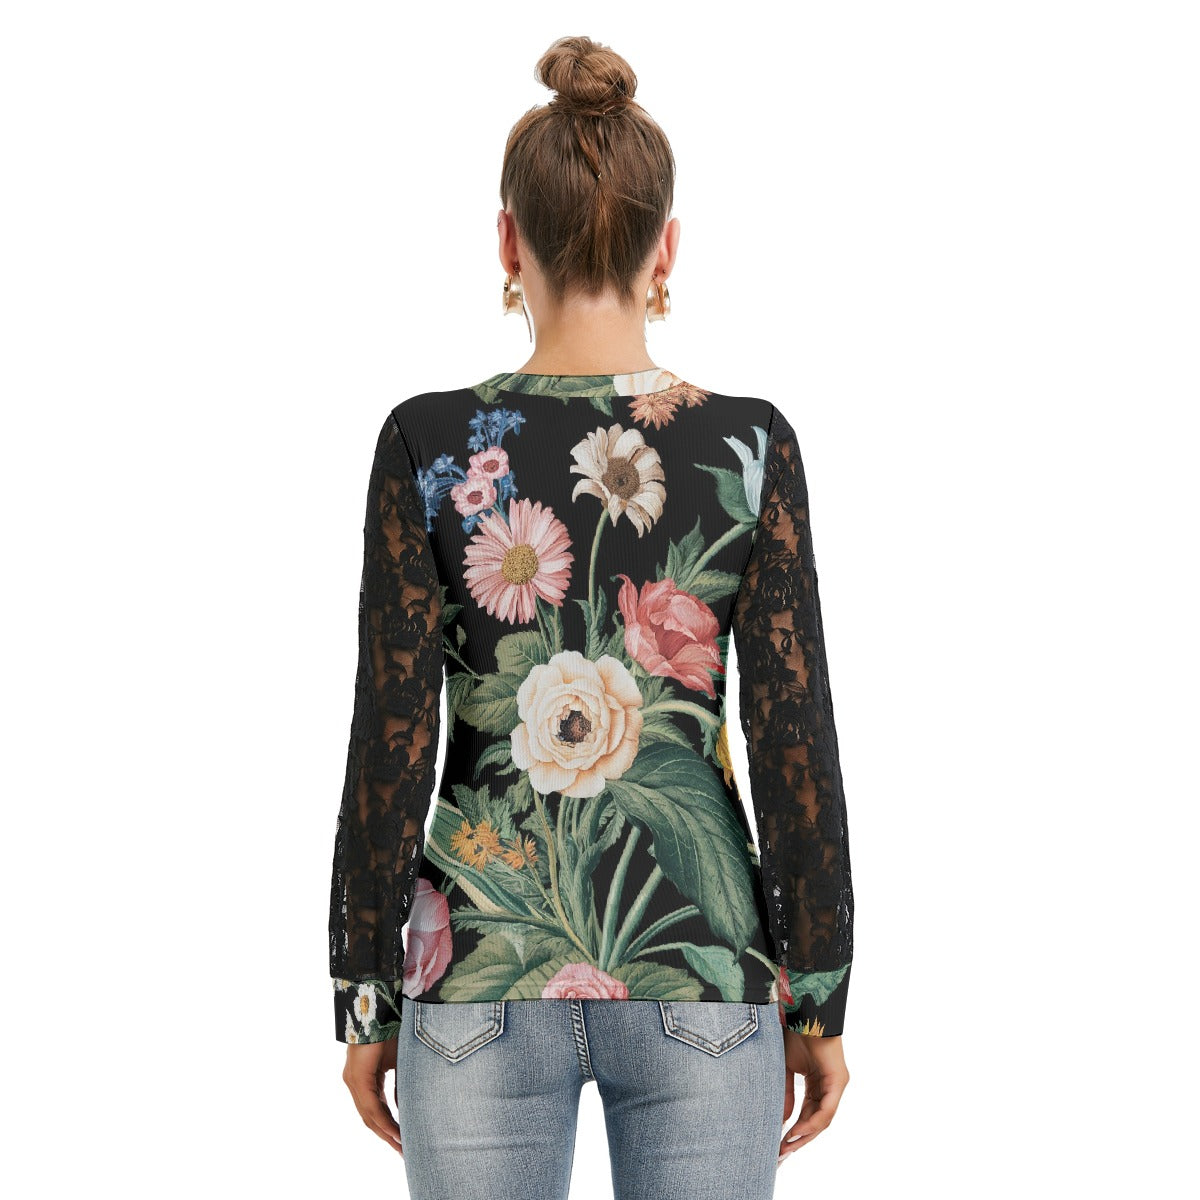 All-Over Print Women's T-shirt And Sleeve With Black Lace